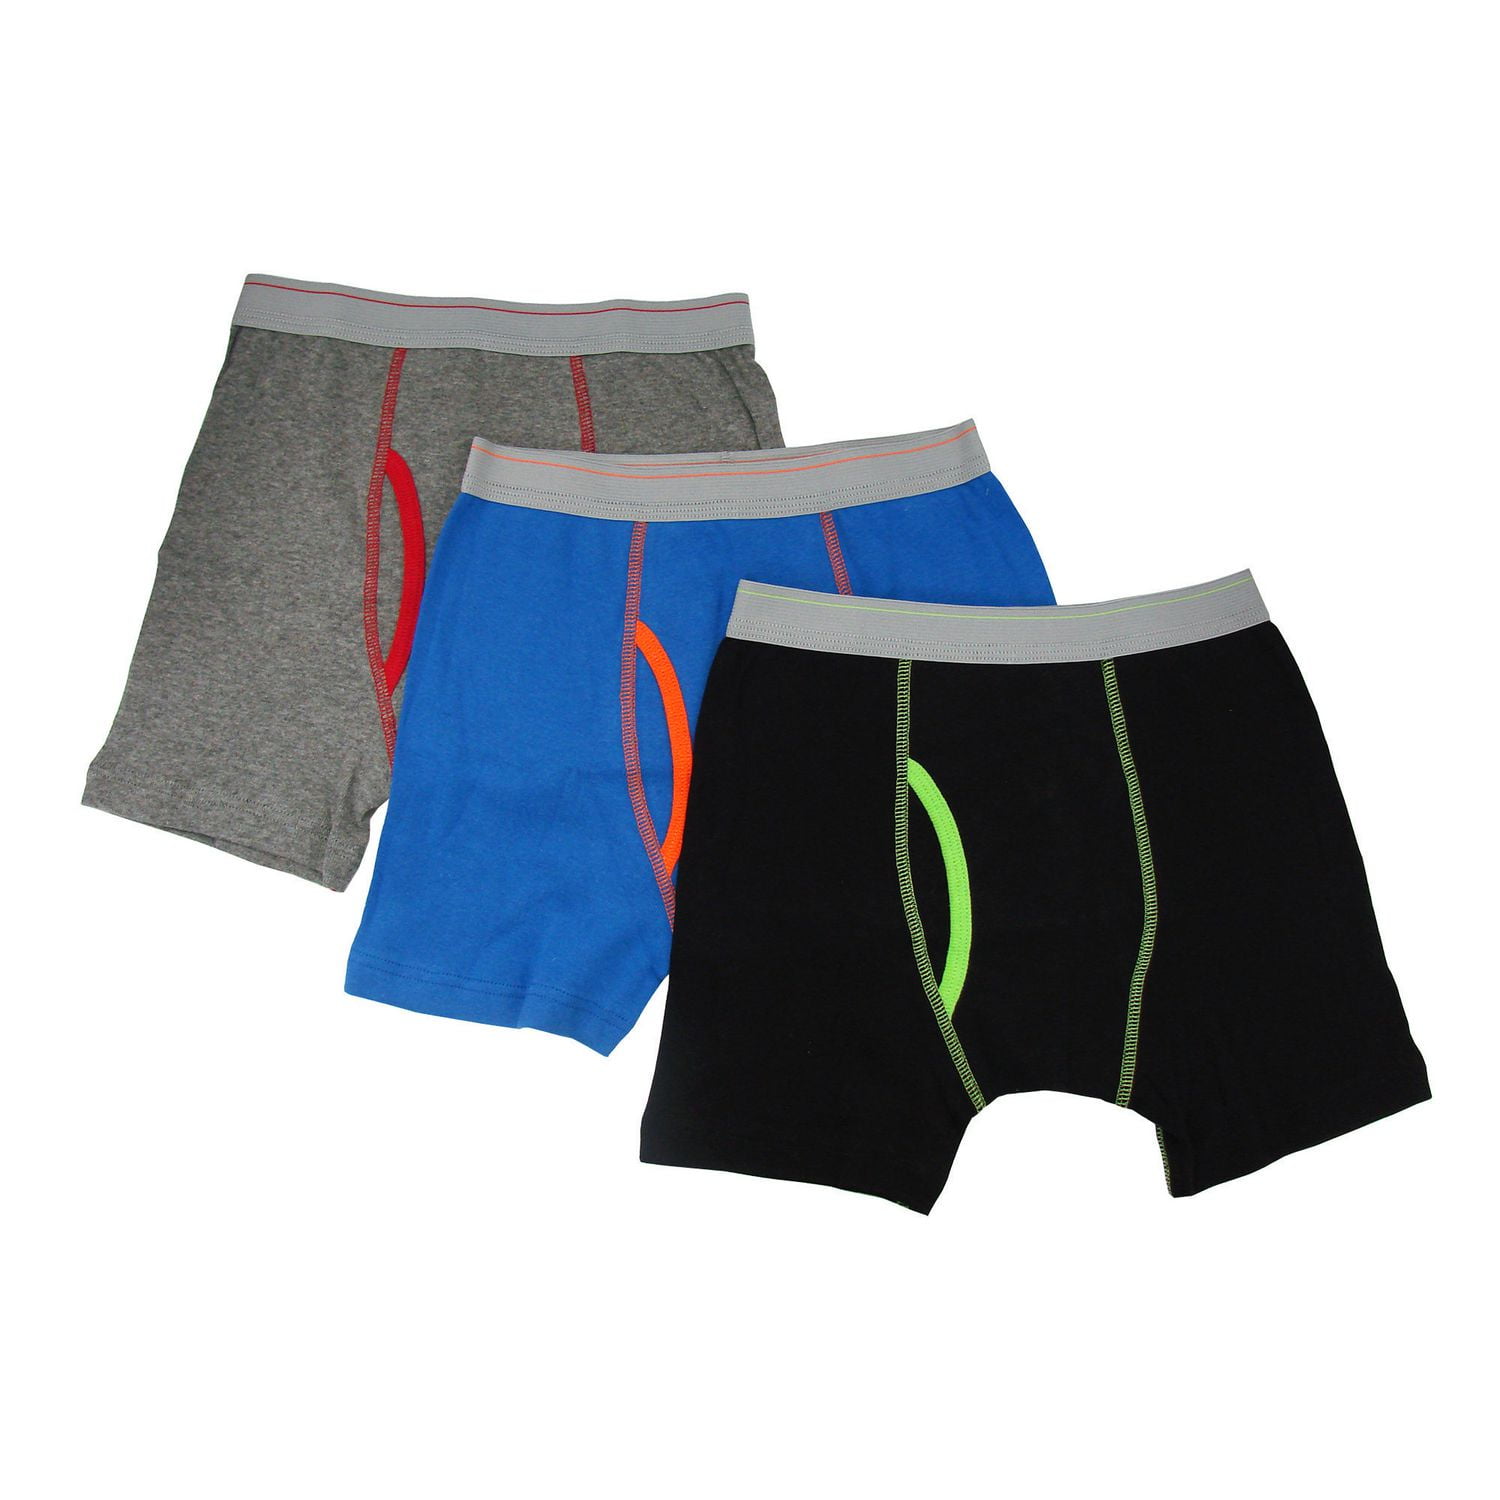 3 BOXES $1.50 OFF! [LOCAL SELLER] SIZE 85 for 11-13 years old Boys and Girls  Kids Underwear 5-piece set Briefs & Trunks